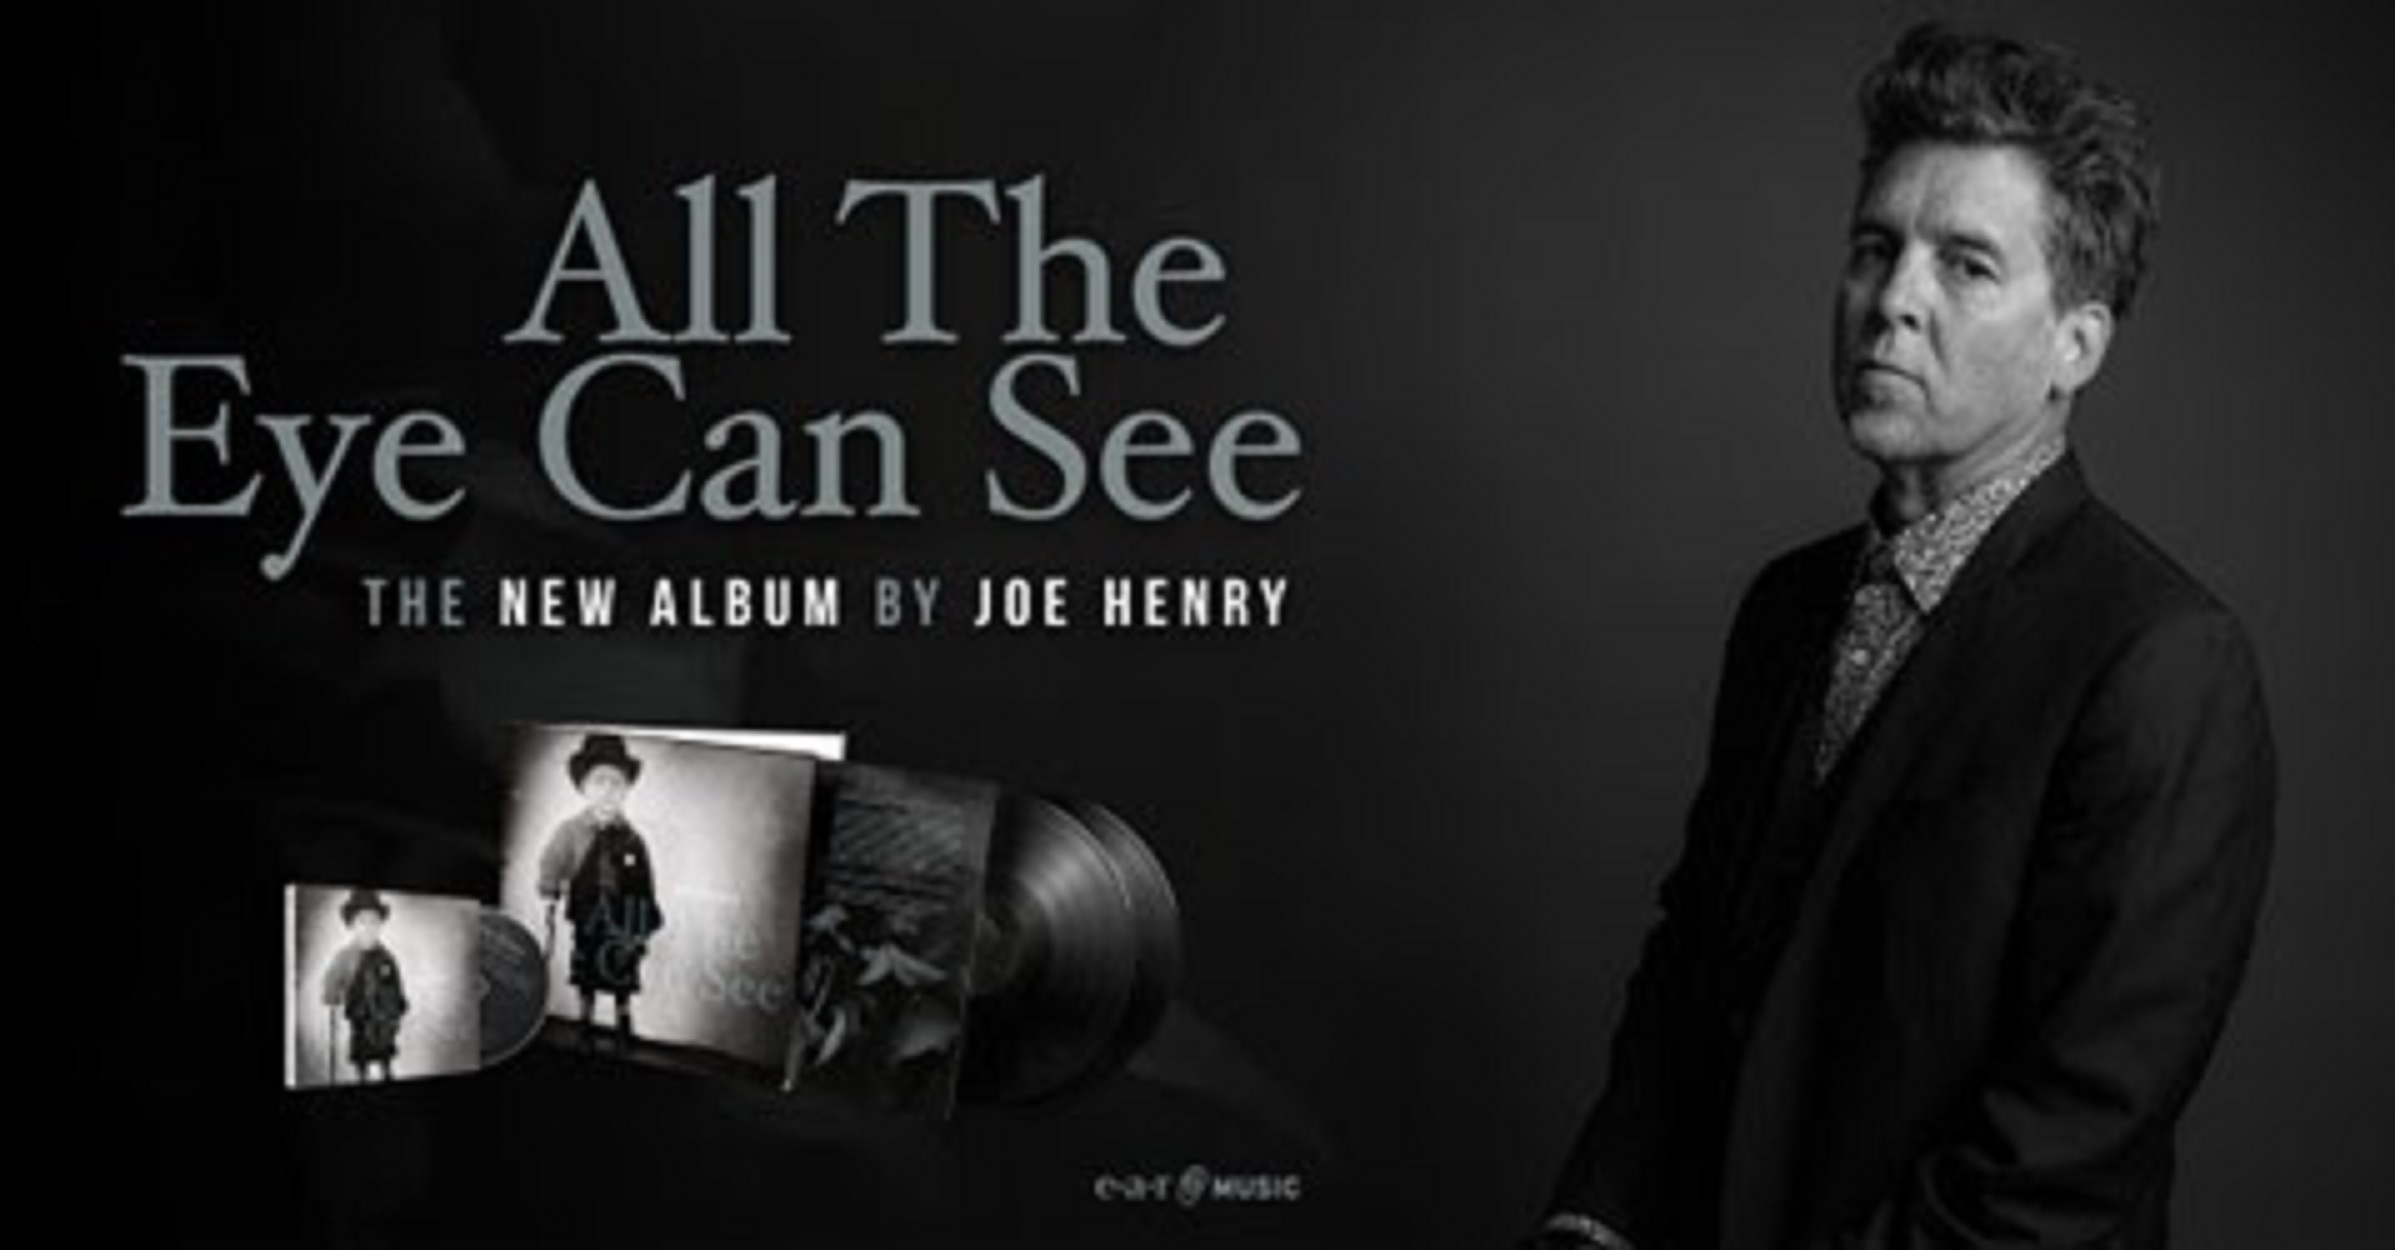 Joe Henry Releases New Album “All The Eye Can See”